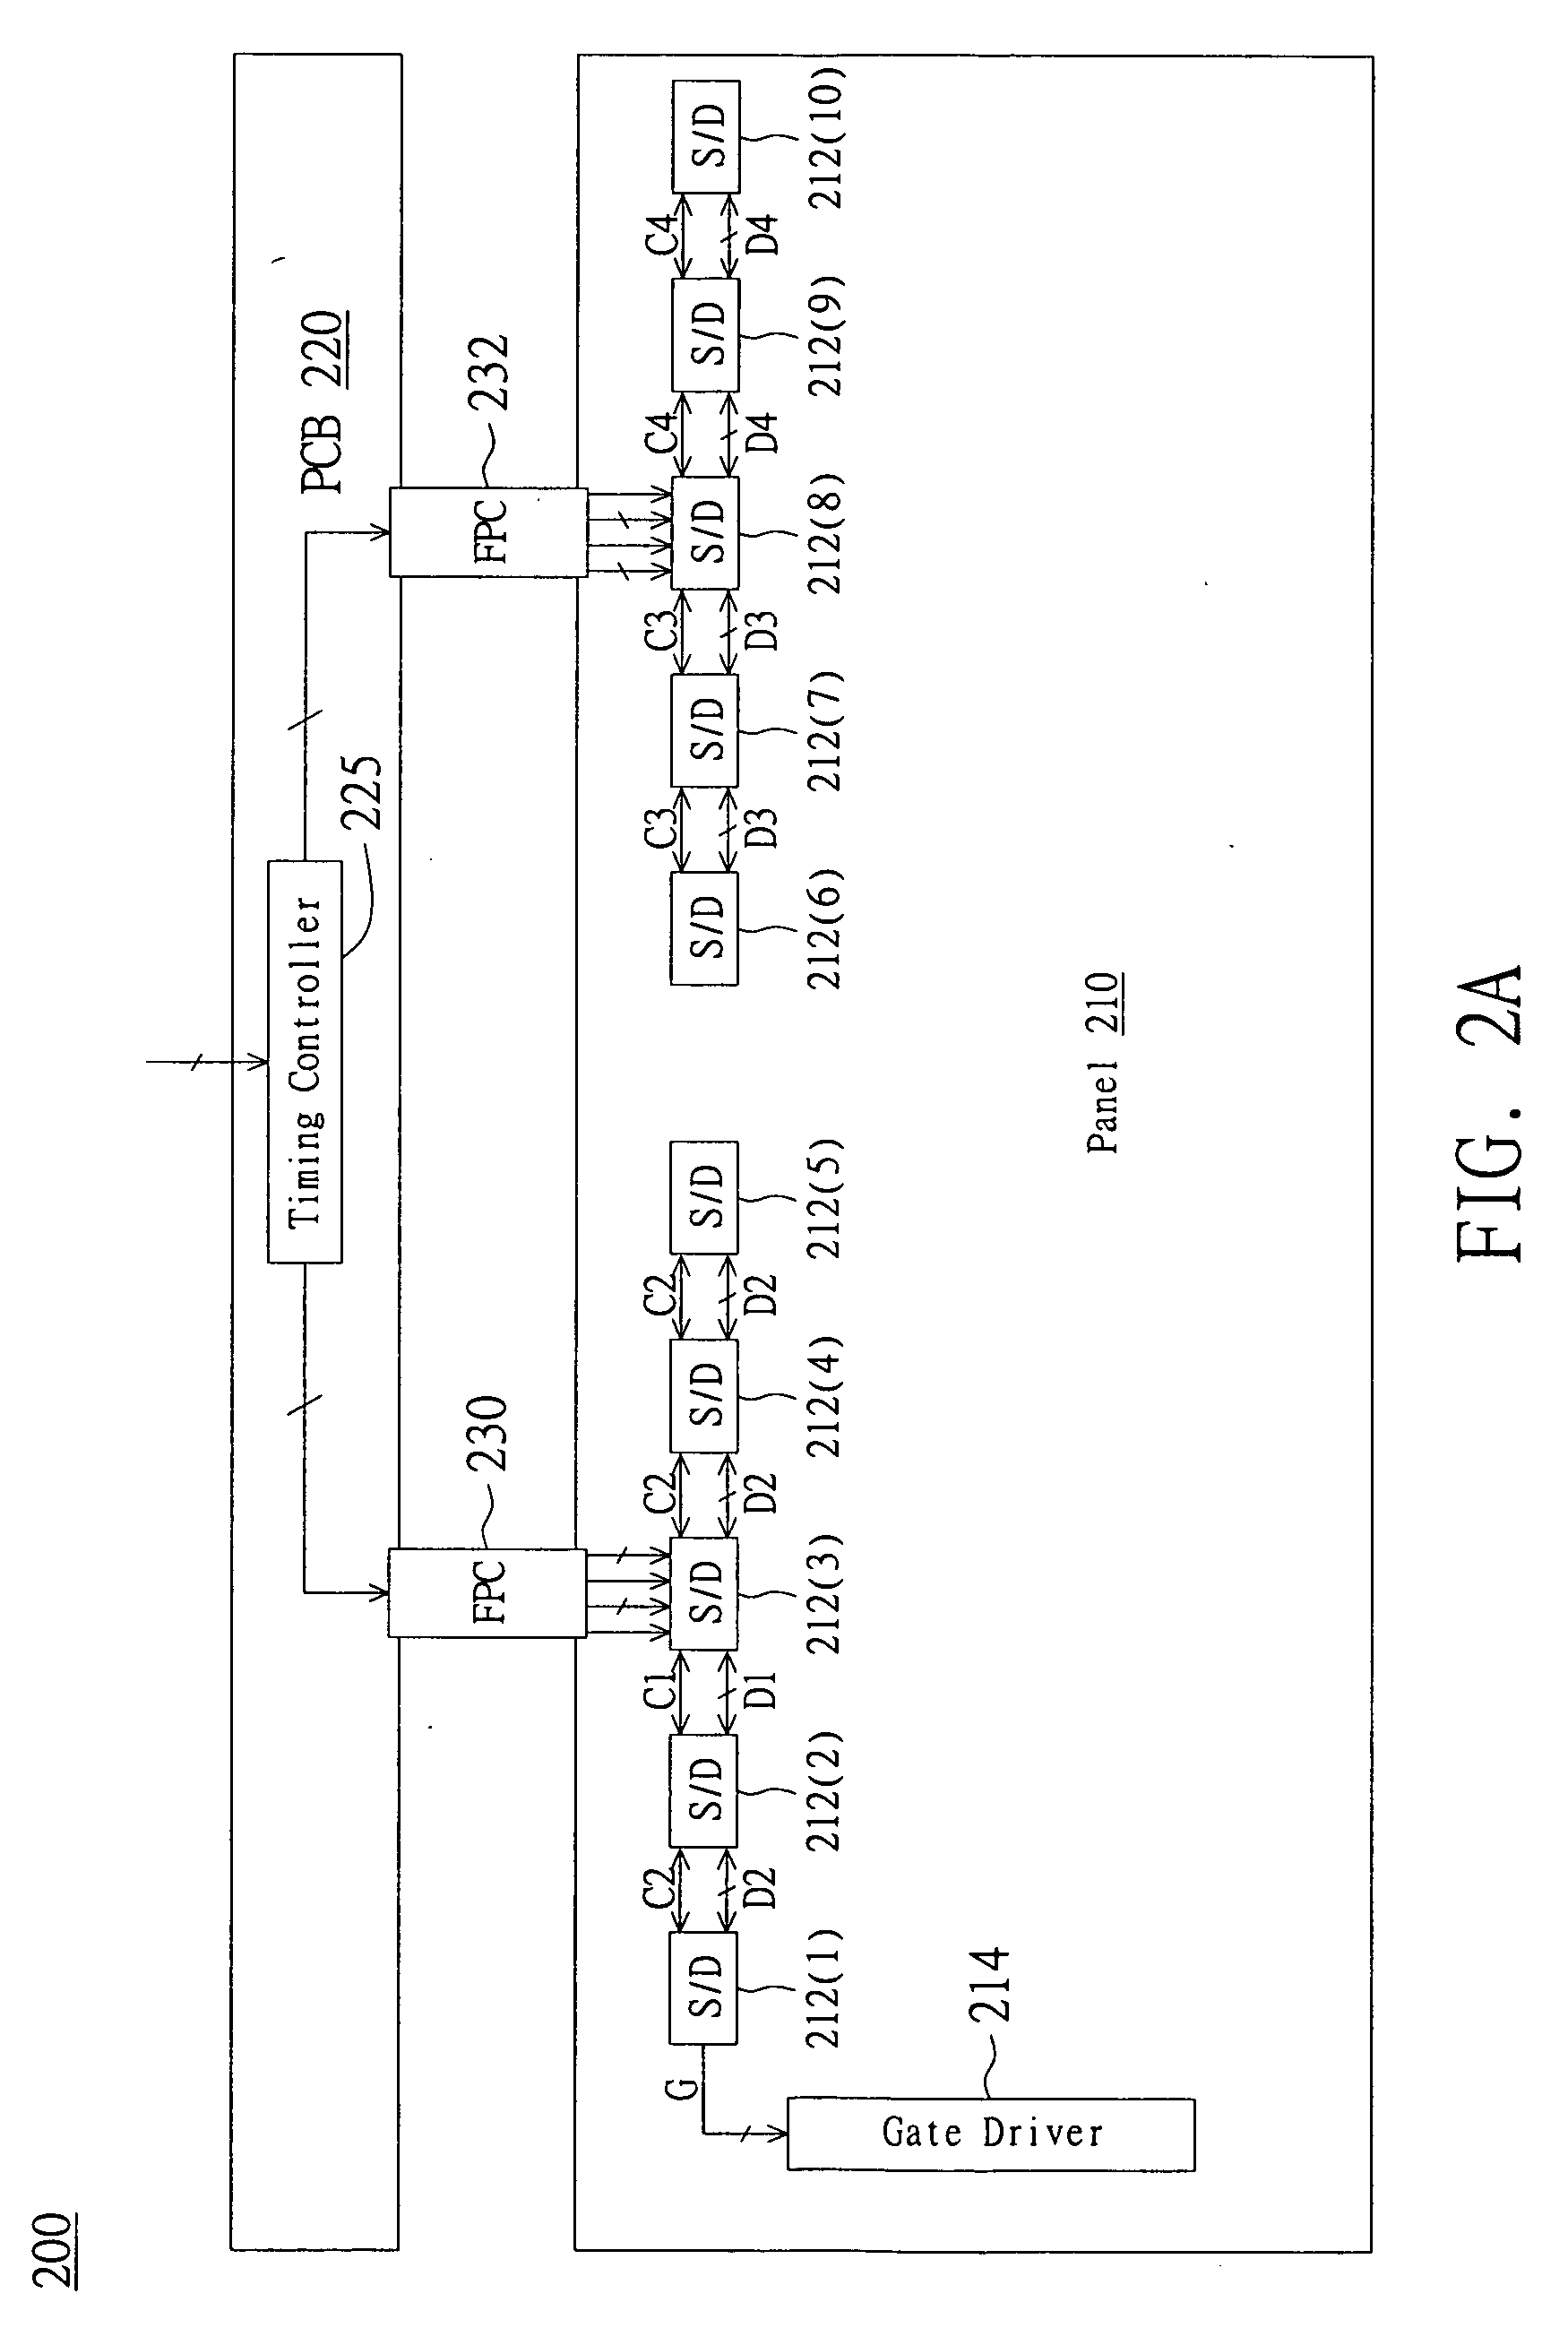 Chip-on-glass liquid crystal display and data transmission method for the same